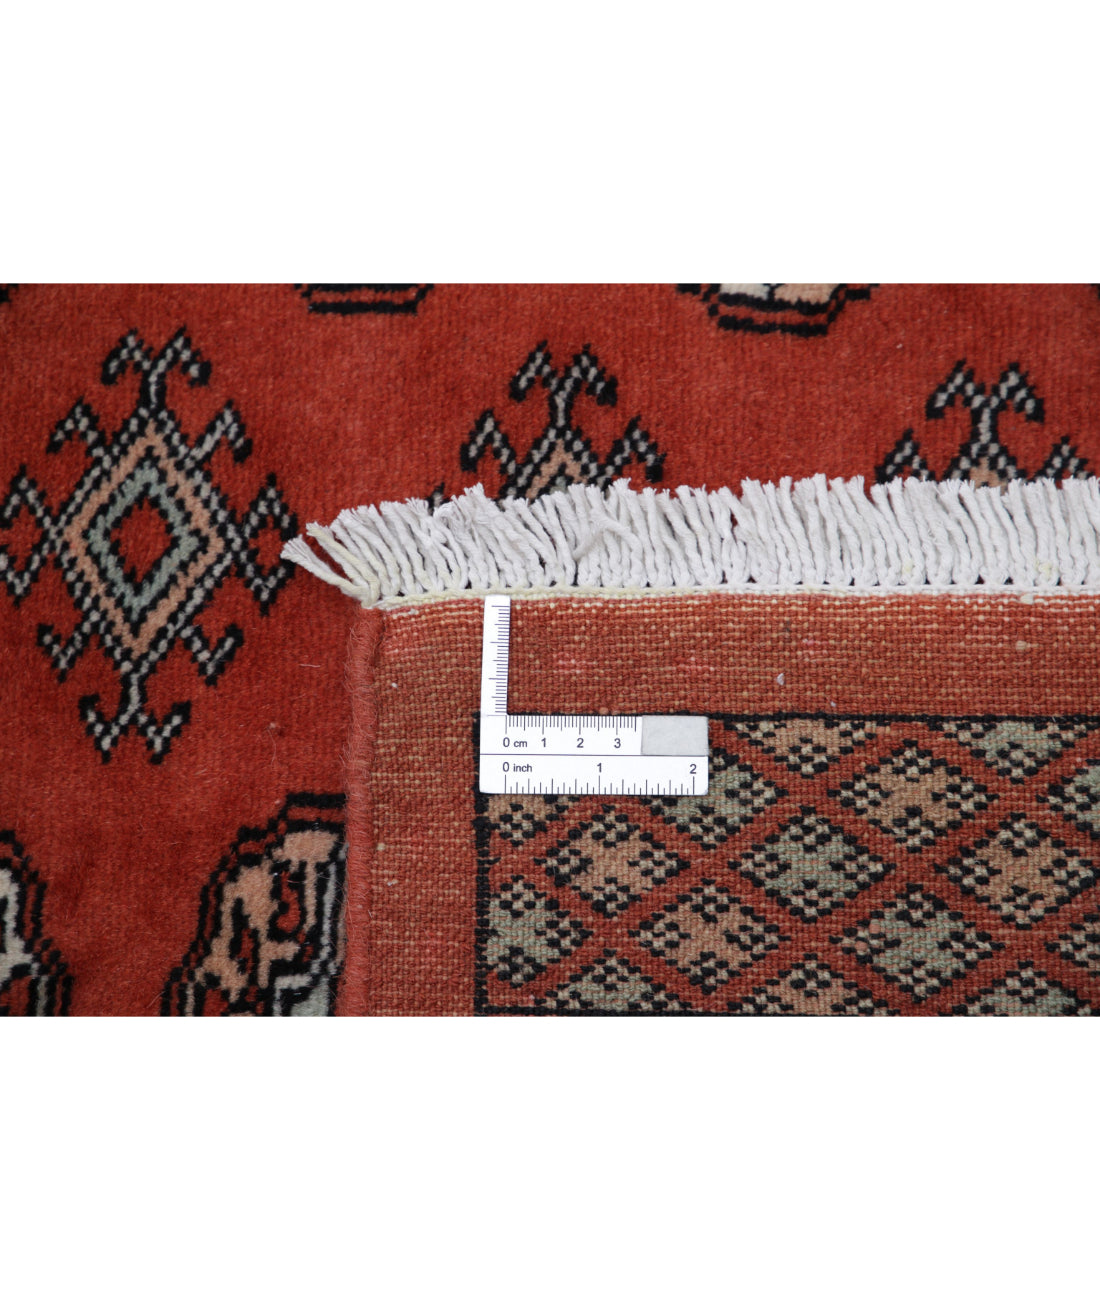 Hand Knotted Tribal Bokhara Wool Rug - 8'1'' x 10'1'' 8'1'' x 10'1'' (243 X 303) / Rust / Ivory